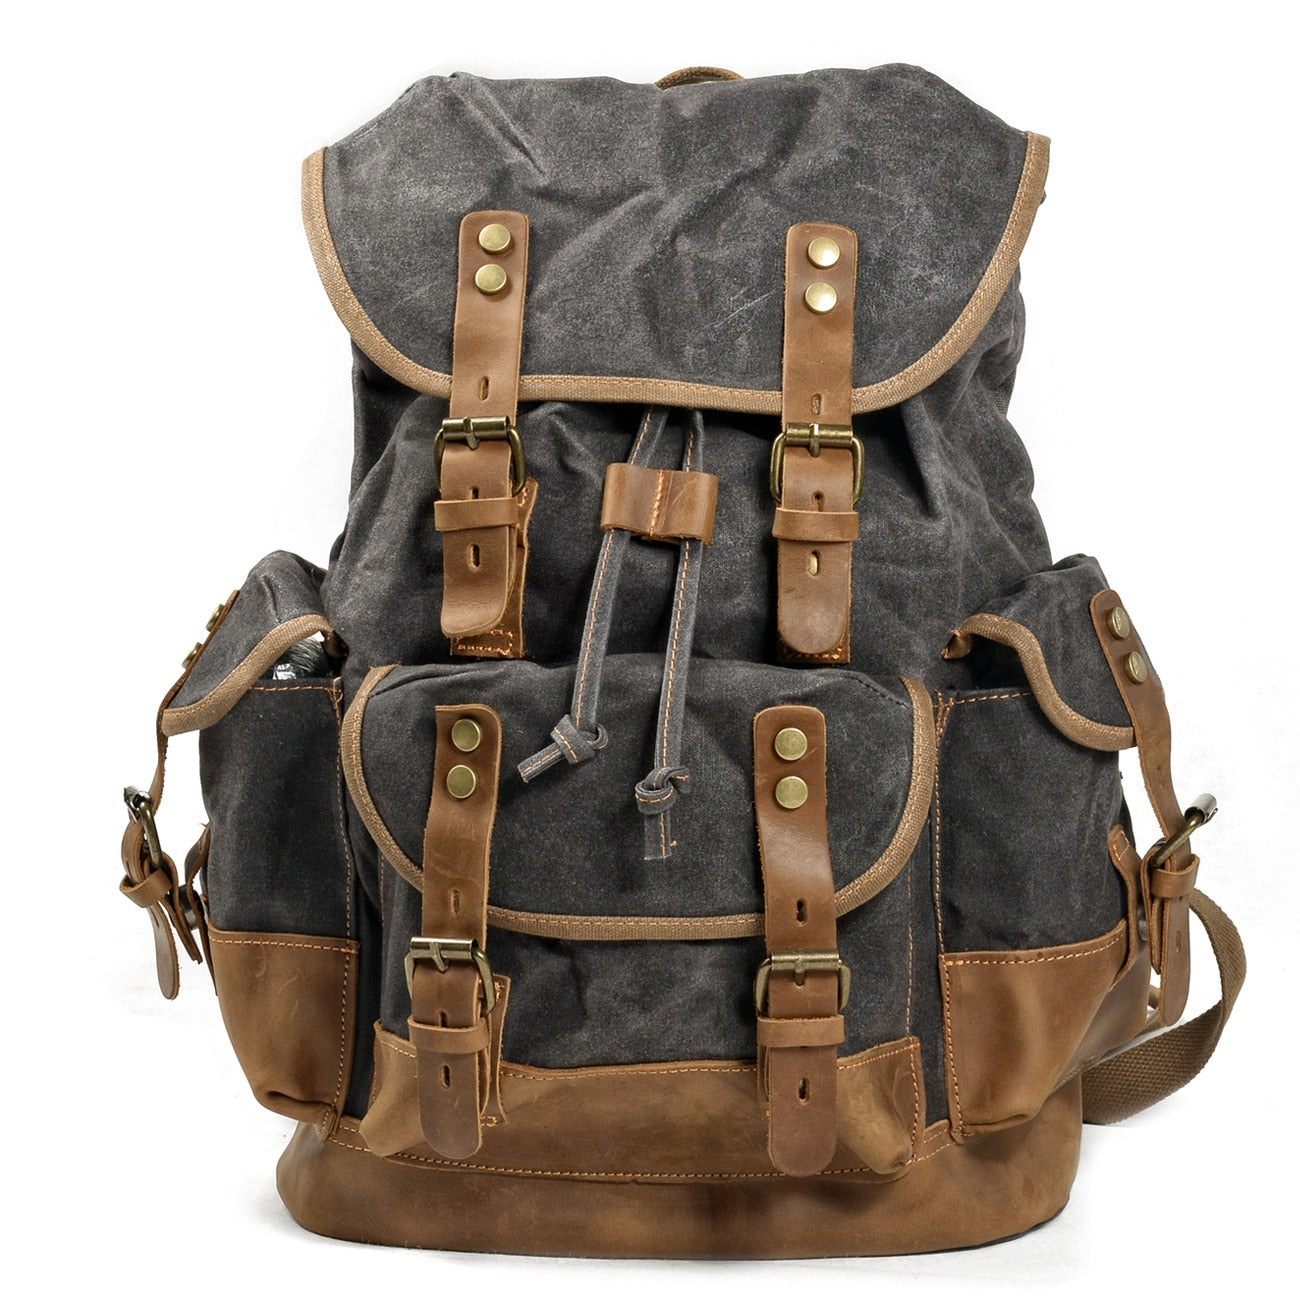 Vintage Backpack from Canvas & Cowhide for Hiking Camping - Dark Grey Available at 2Fast2See.co